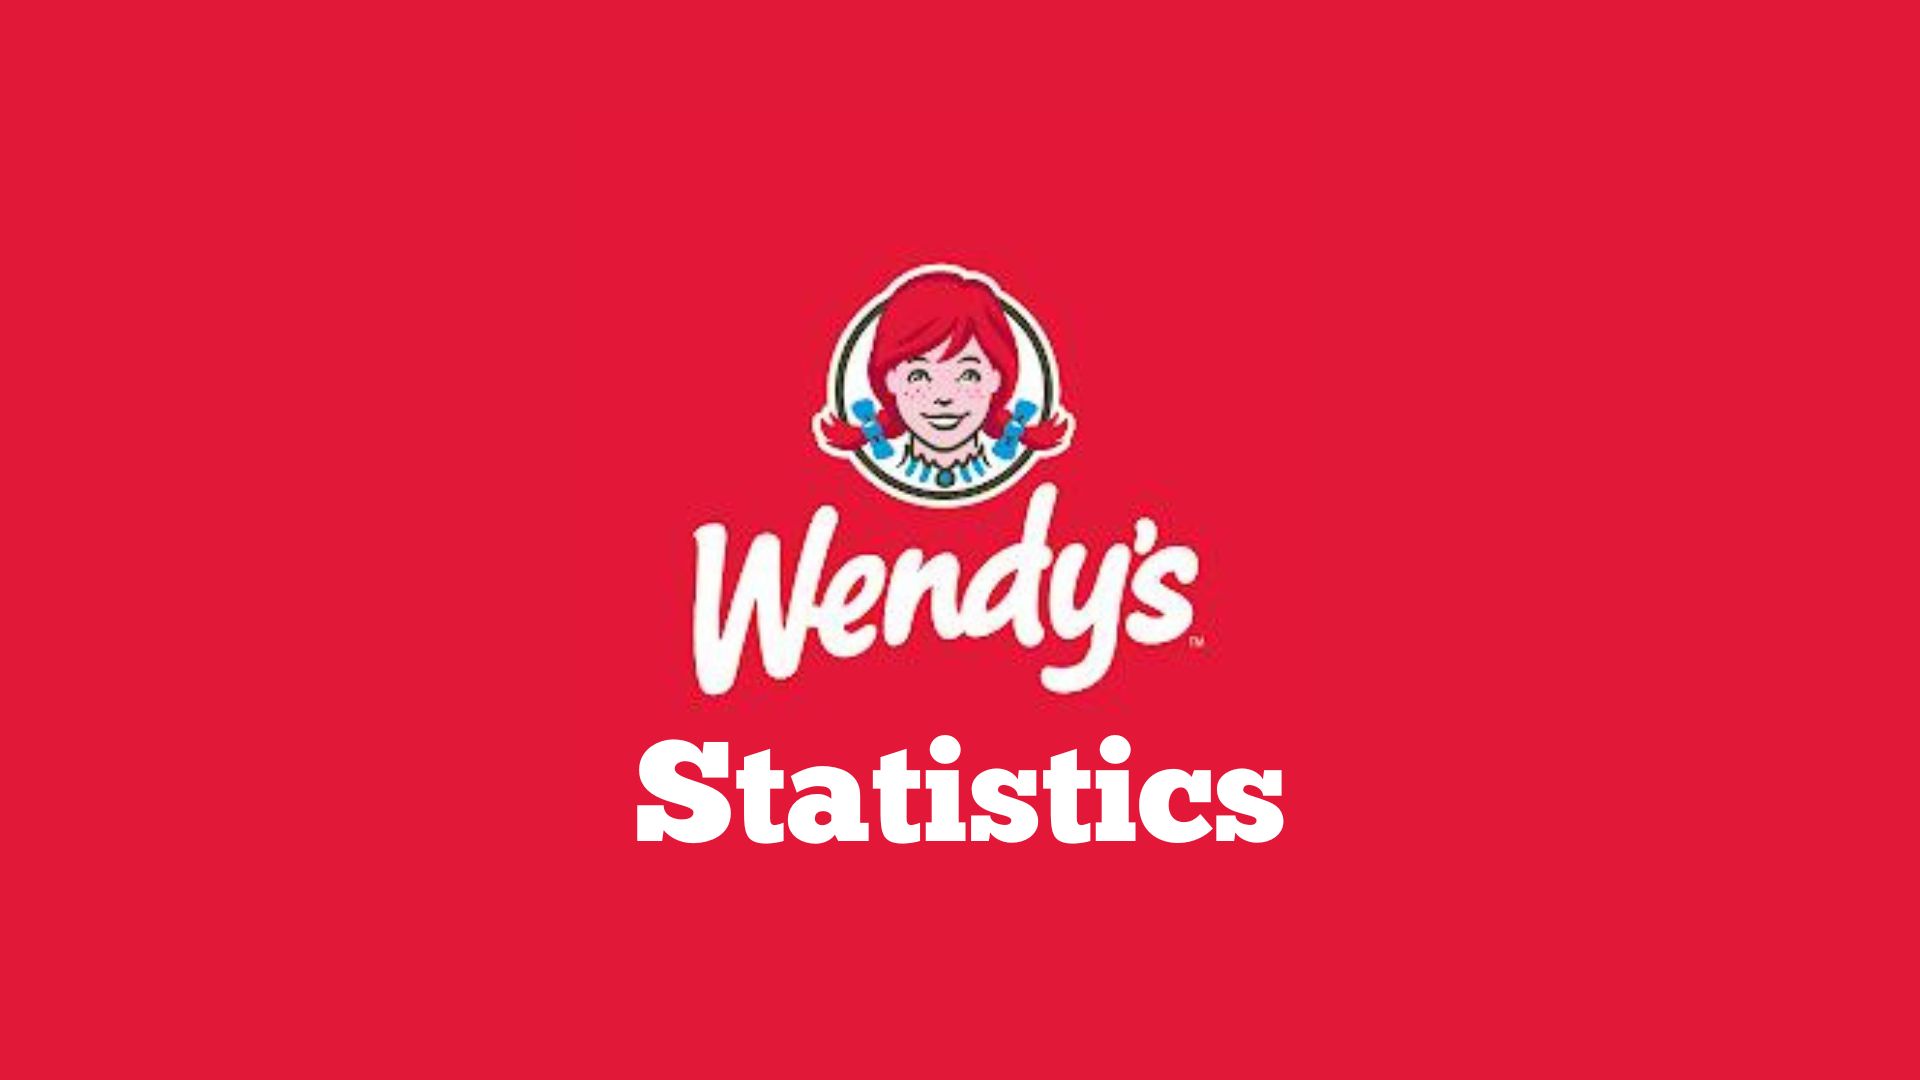 Wendy’s Statistics – By Product, Website Traffic, Demographics, Market Share, Display Boards, Brand Profile, Locations, State, Employment